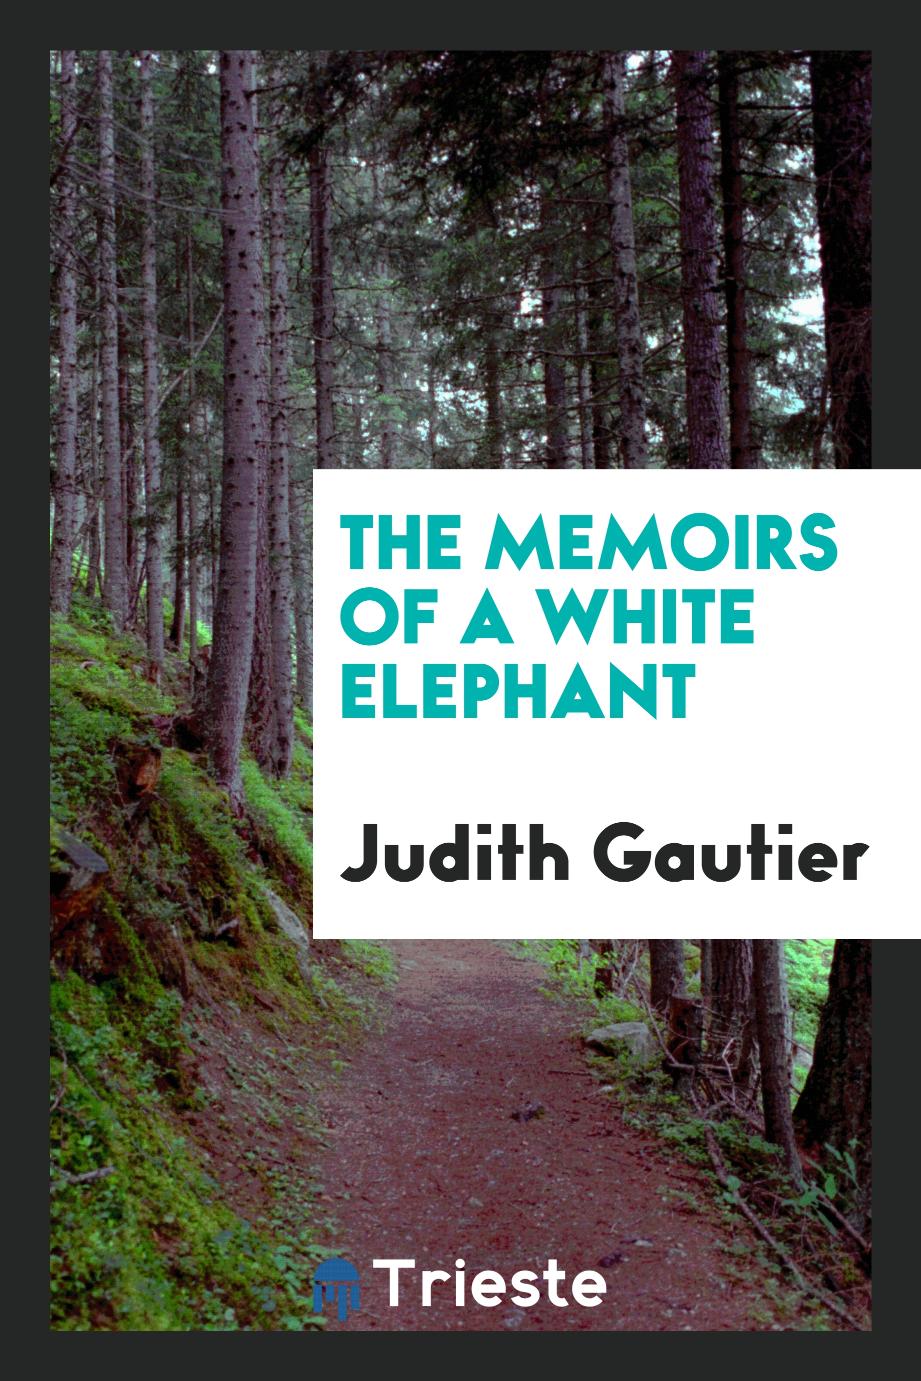 The memoirs of a white elephant